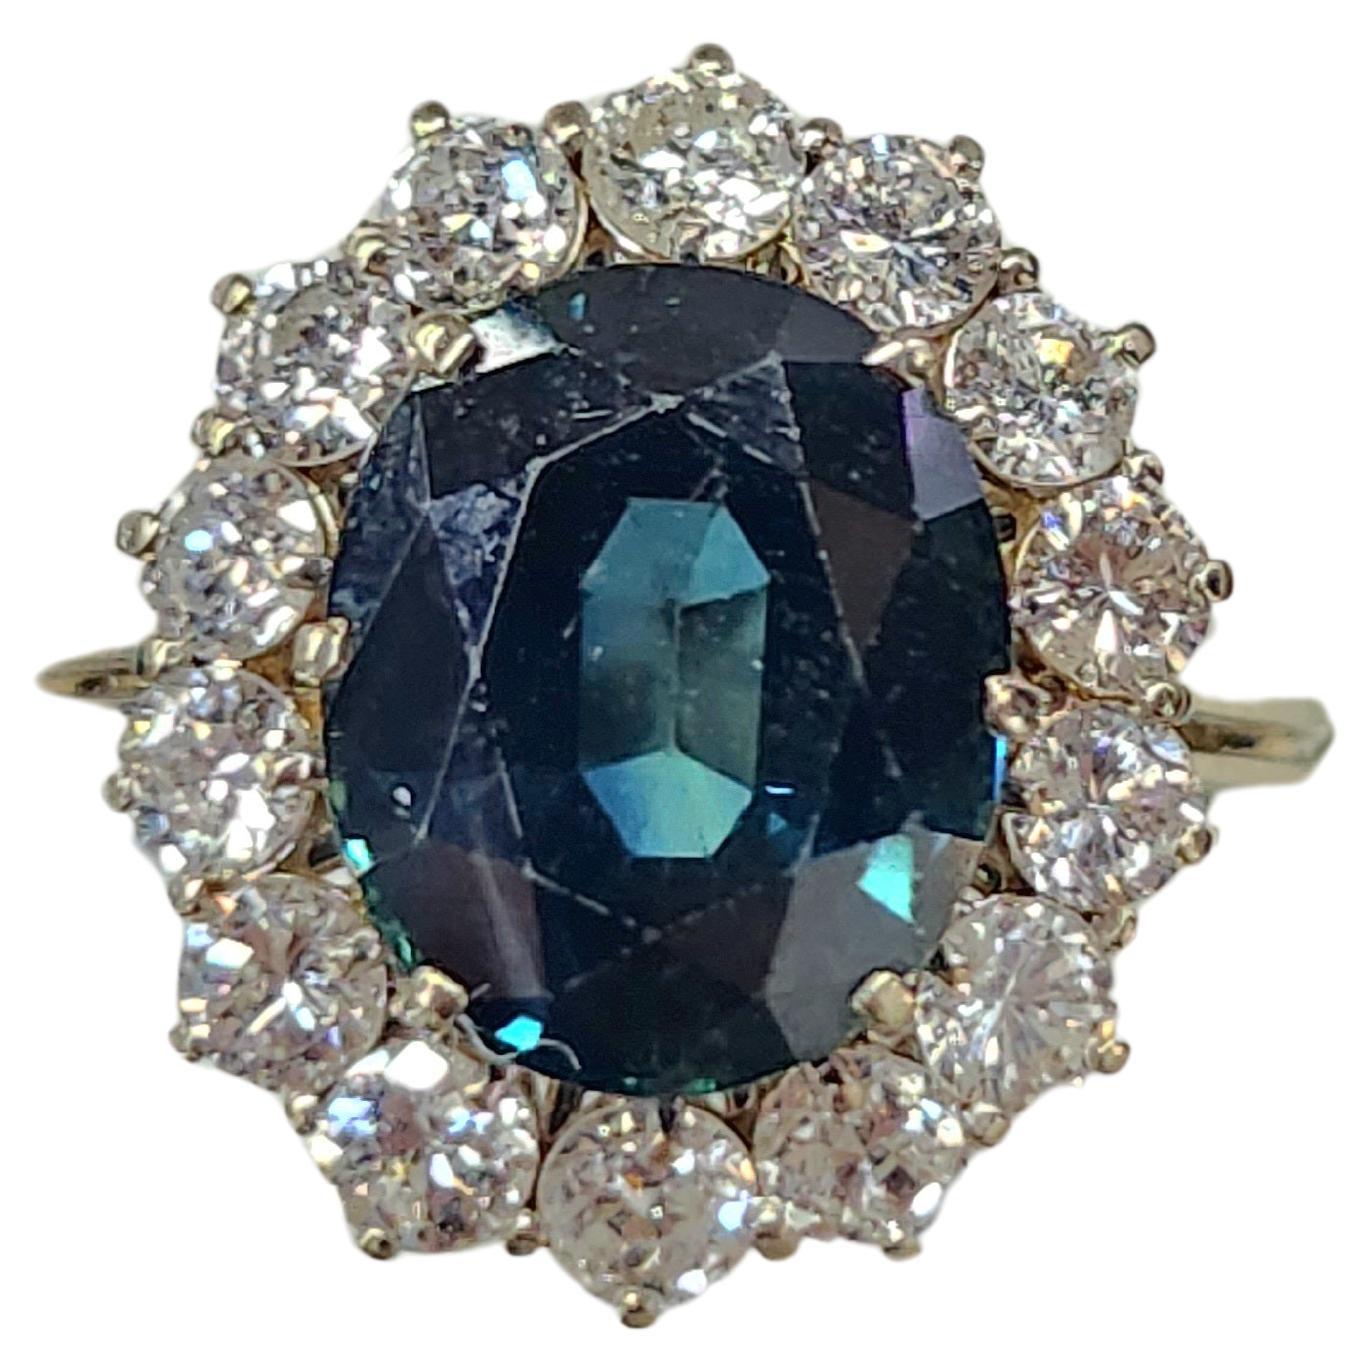 Vintage 18k gold ring centered with natural oval greenish blue sapphire crystallized ocean color with an estimate weight of 5 to 6 carats diameter 10mm×9mm flanked with old european cut diamonds with an estimate weight 1.2 carats H color white vs